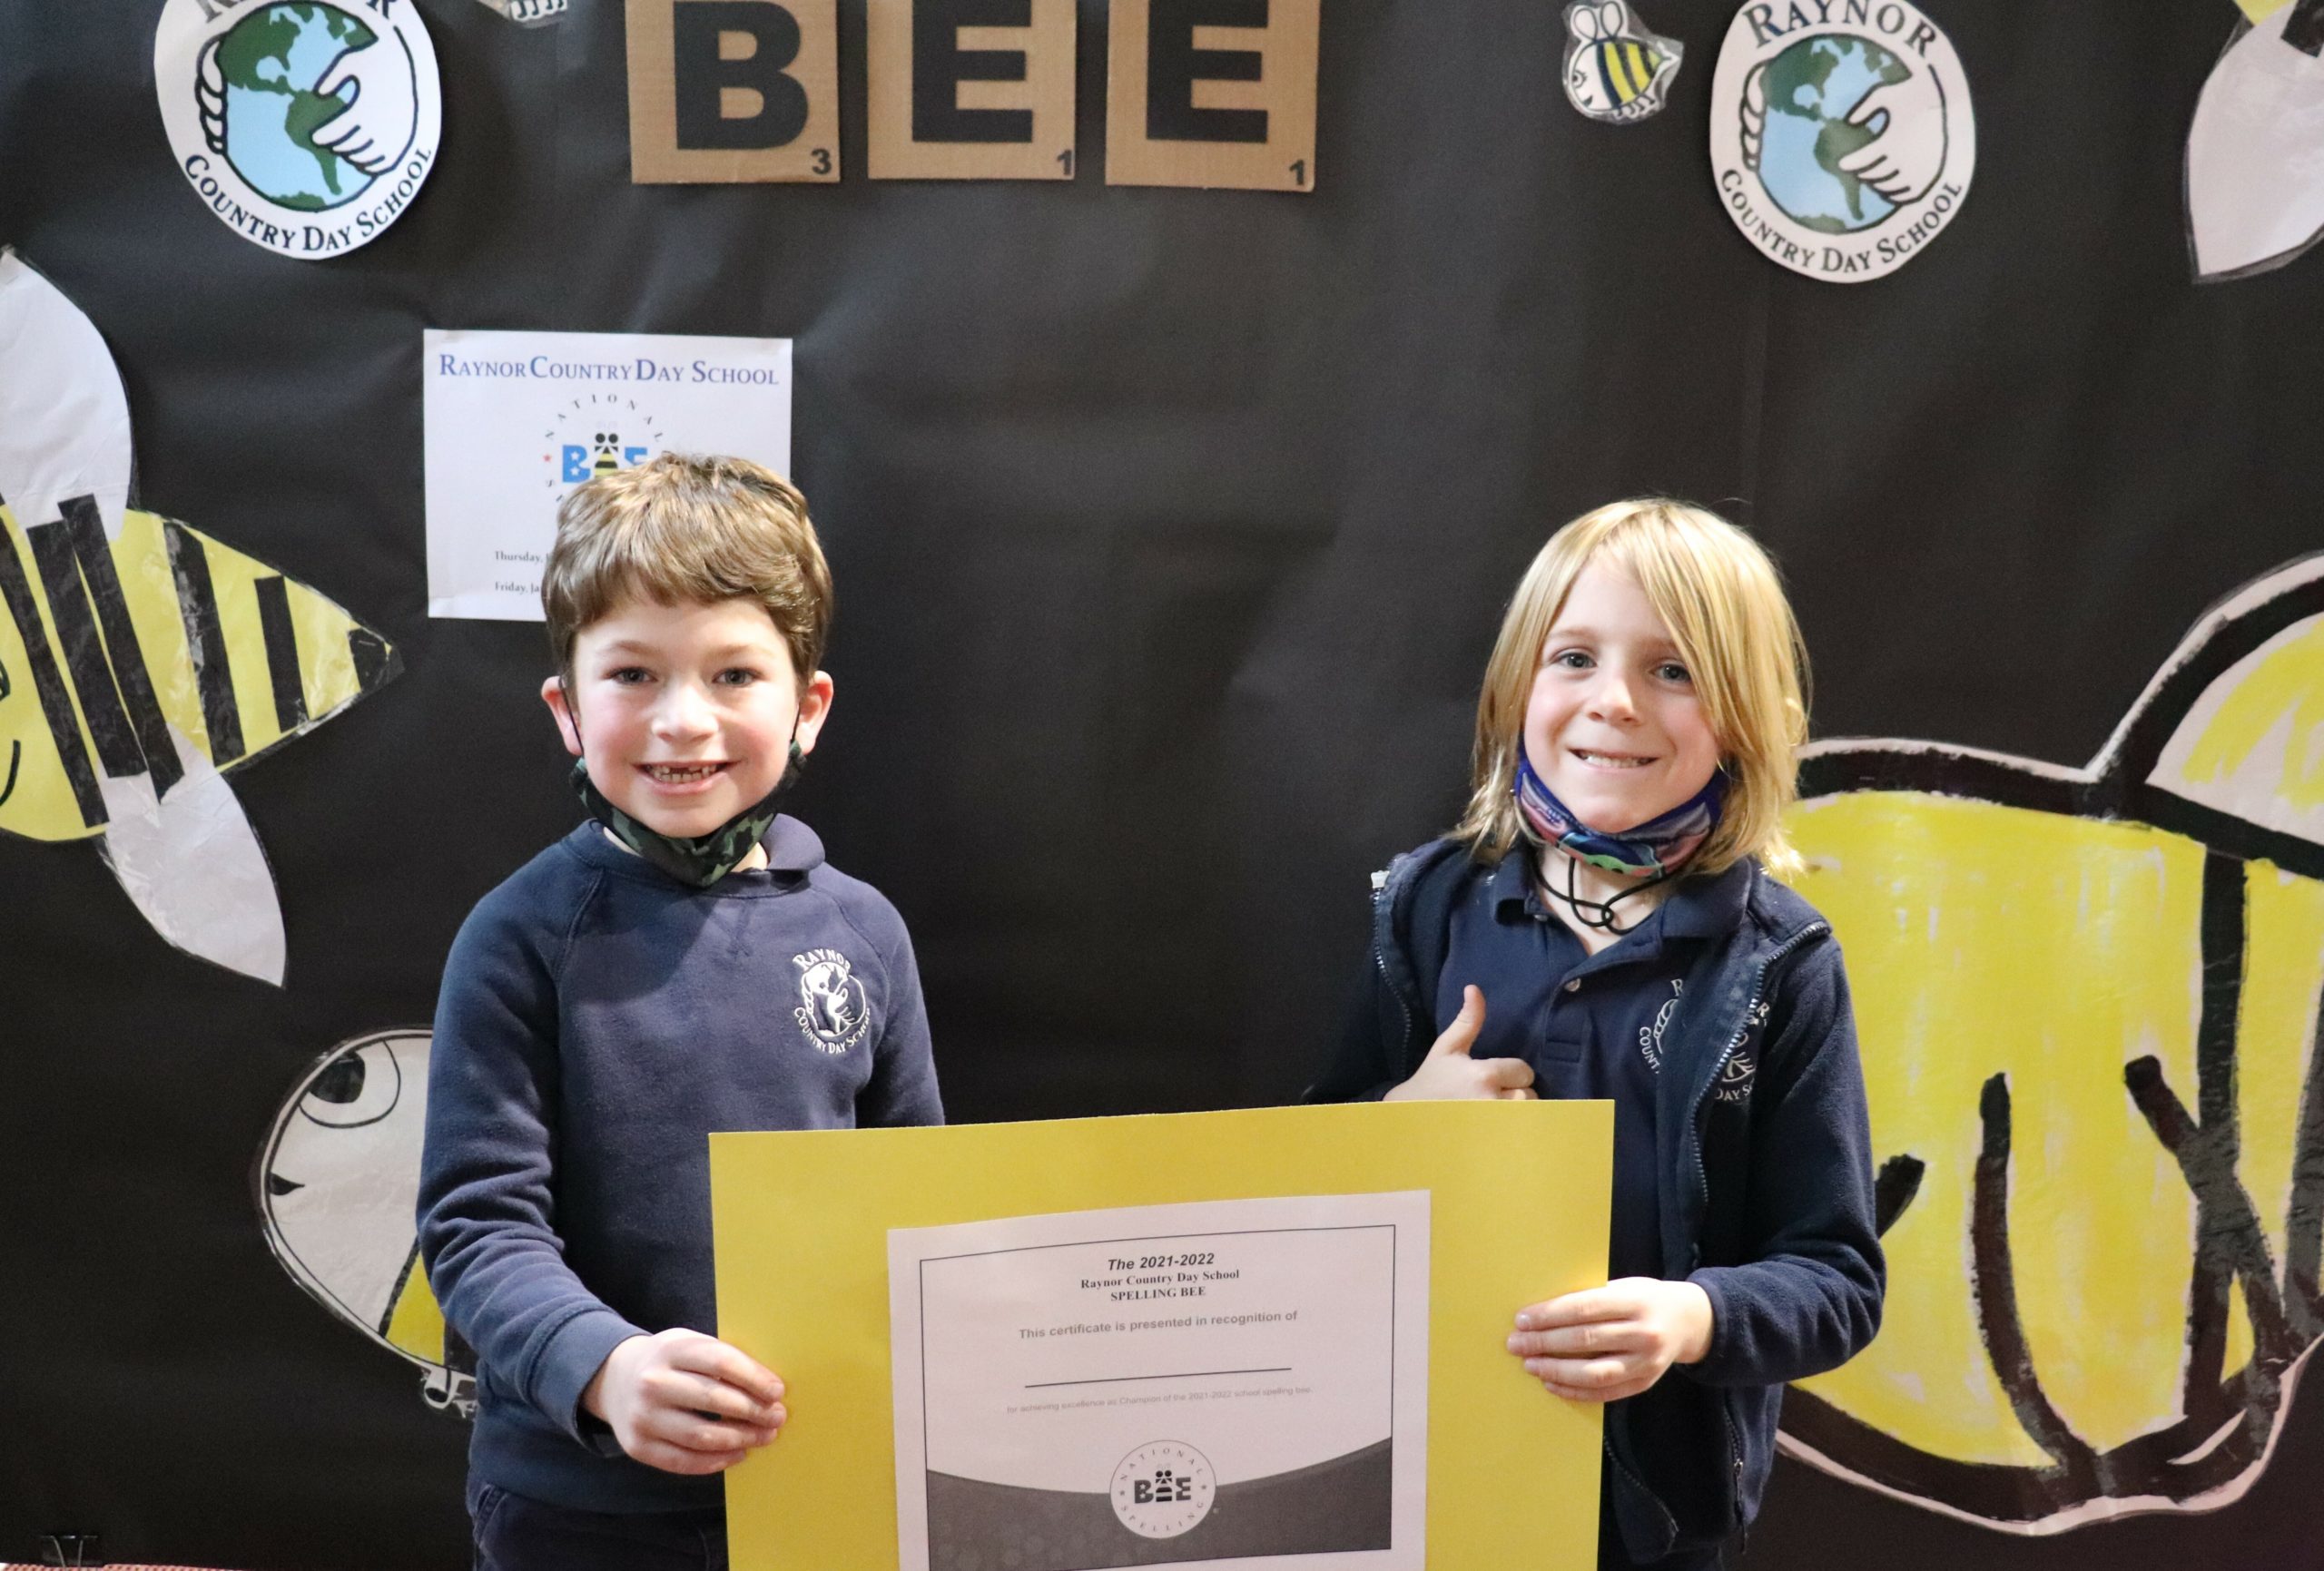 First-grader John Everitt and second-grader Porter Faulk  were named co-champions at Raynor Country Day School's Day One Spelling Bee event.  The co-champions moved onto the final round with the senior students and were eventually defeated by Rebecca Bartha.